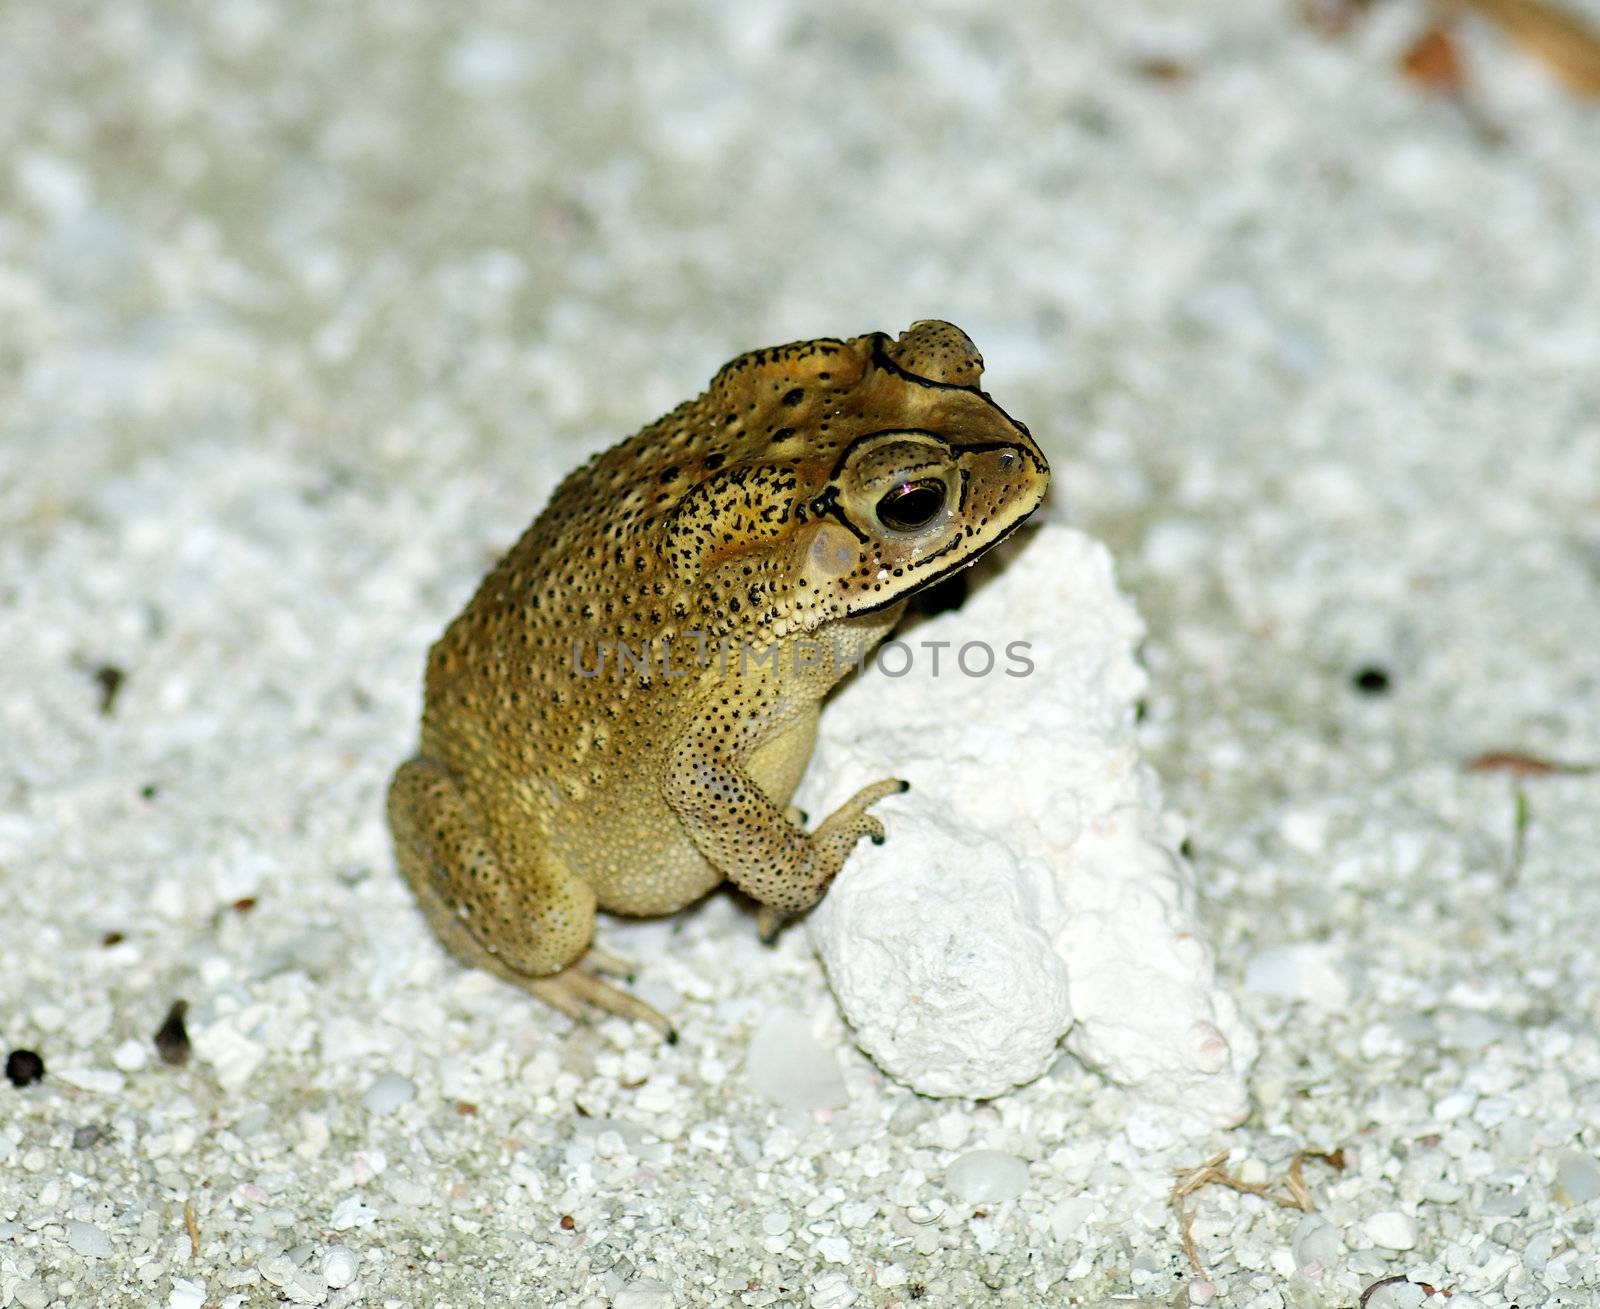 Golden Tree Frog or Hyla standing near stone in natural environment